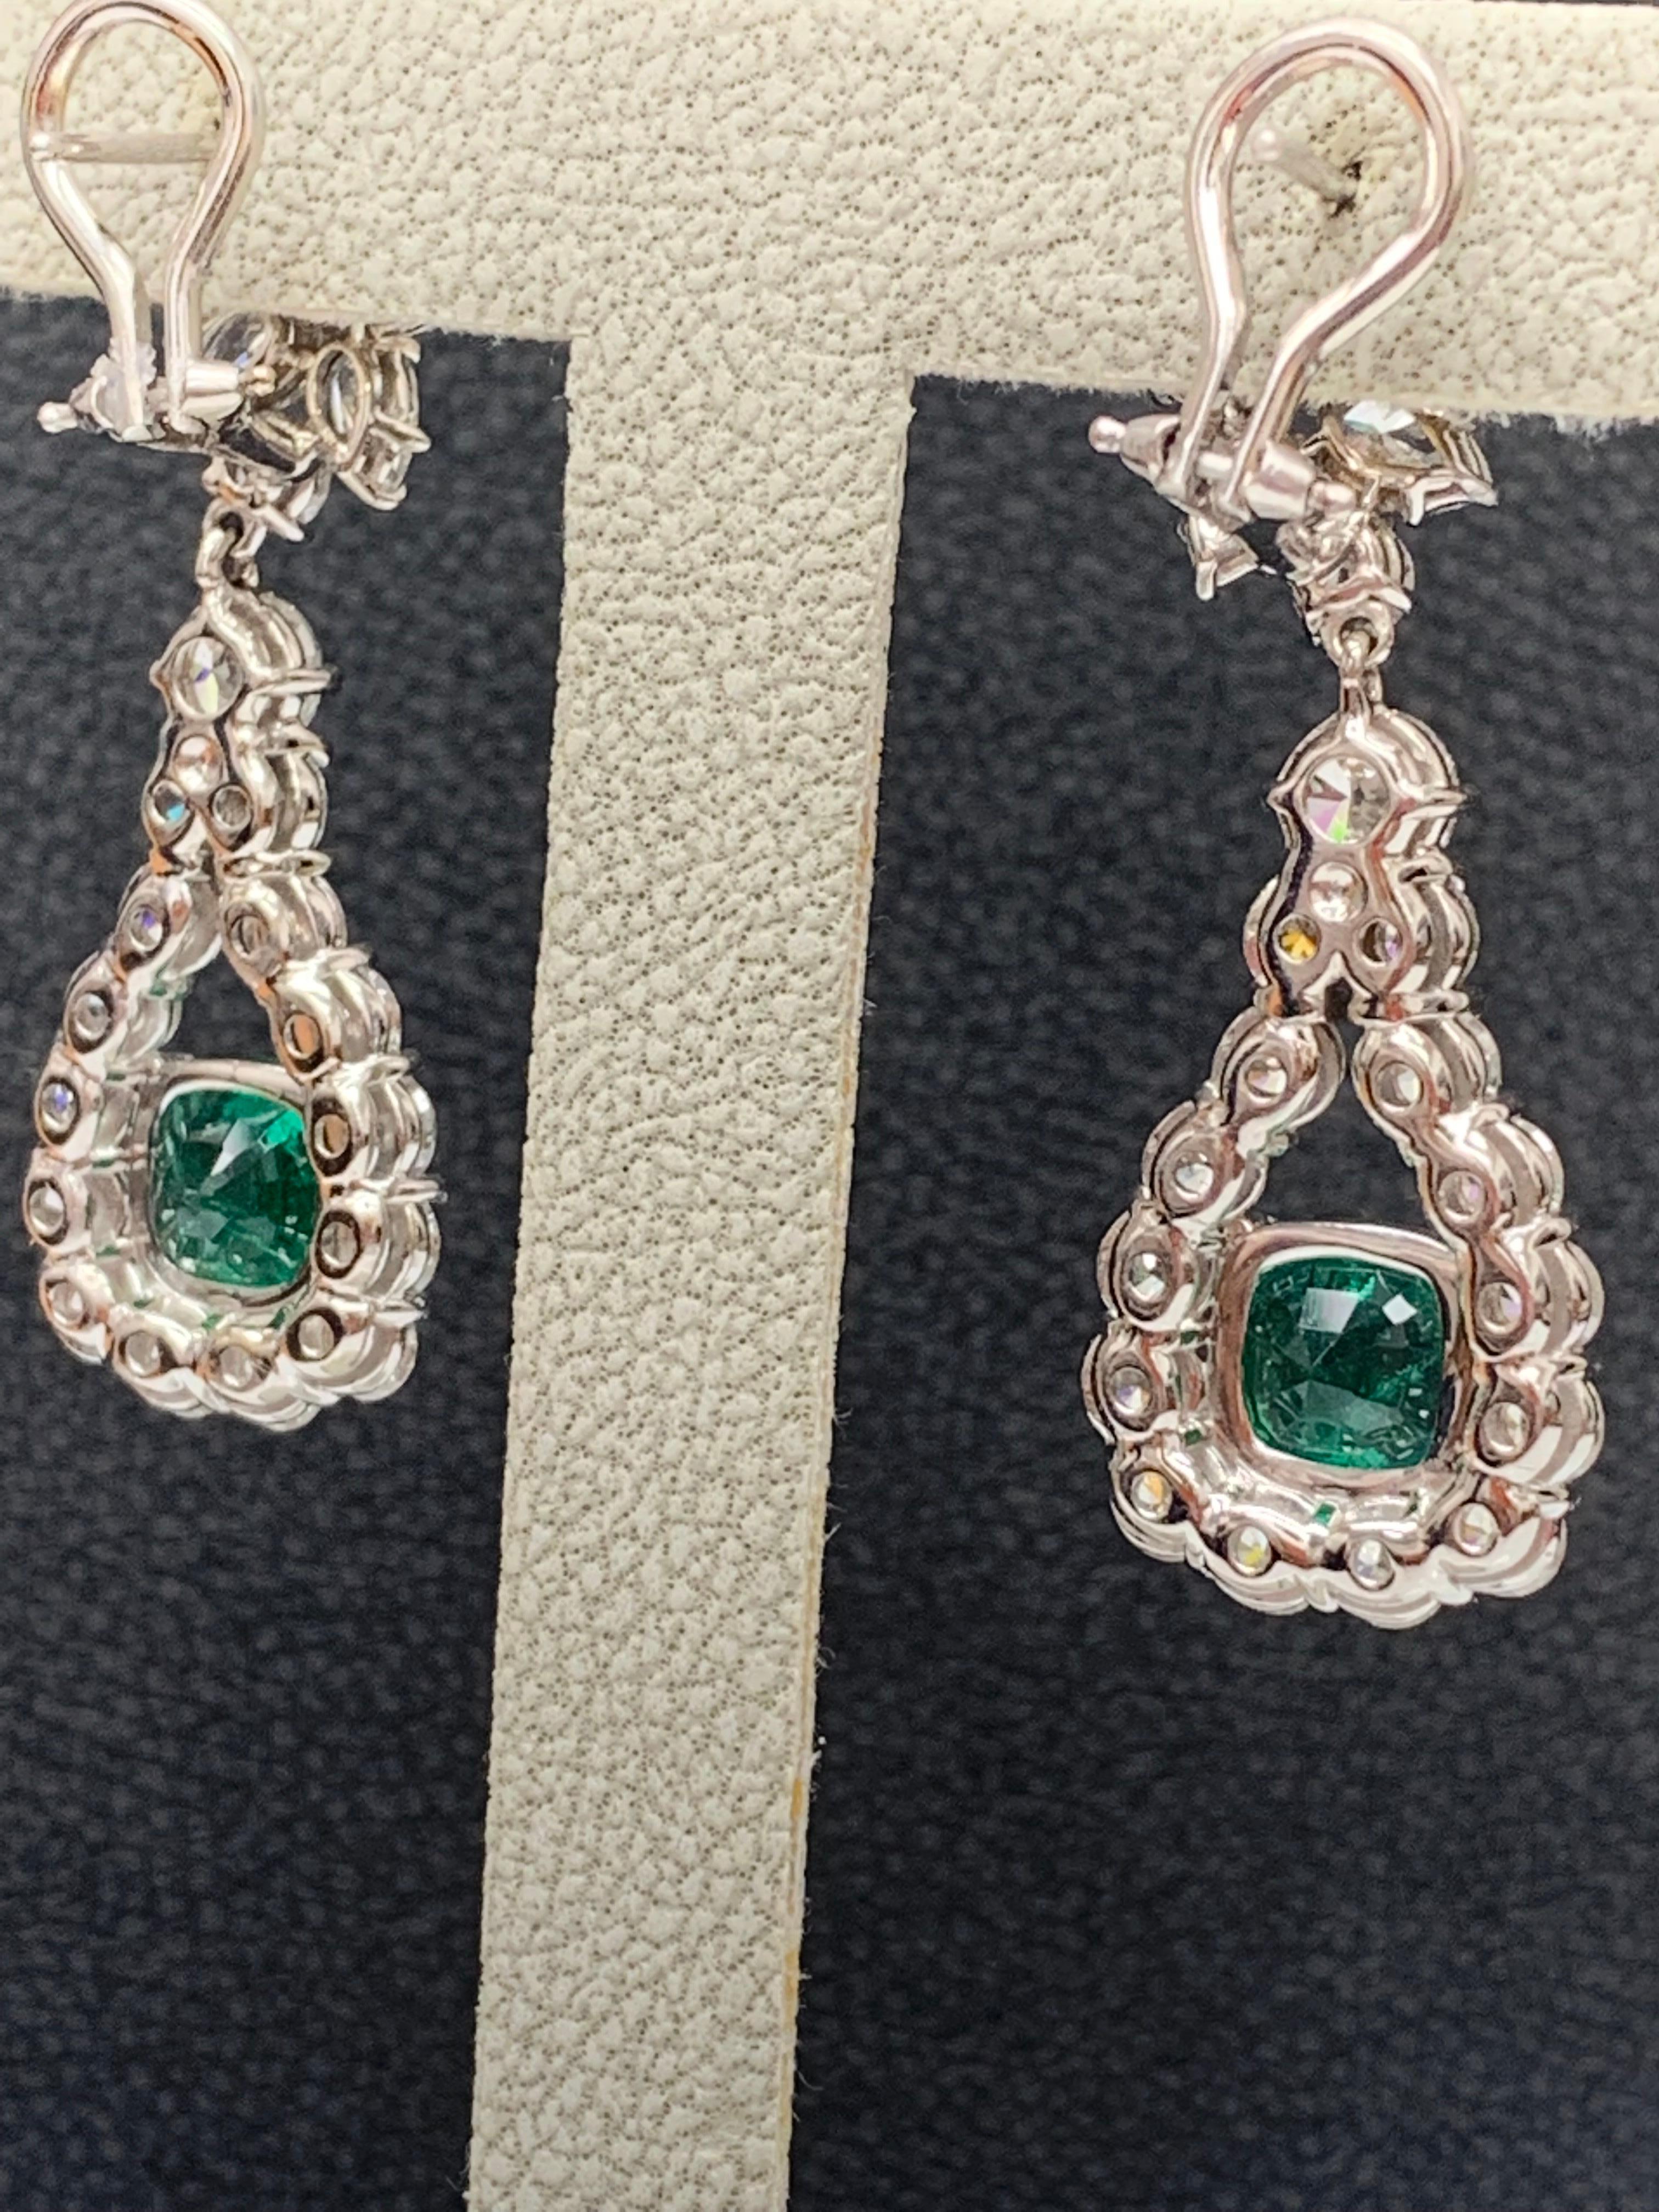 3.49 Carat Cushion Cut Emerald and Diamond Drop Earrings in 18K White Gold For Sale 5